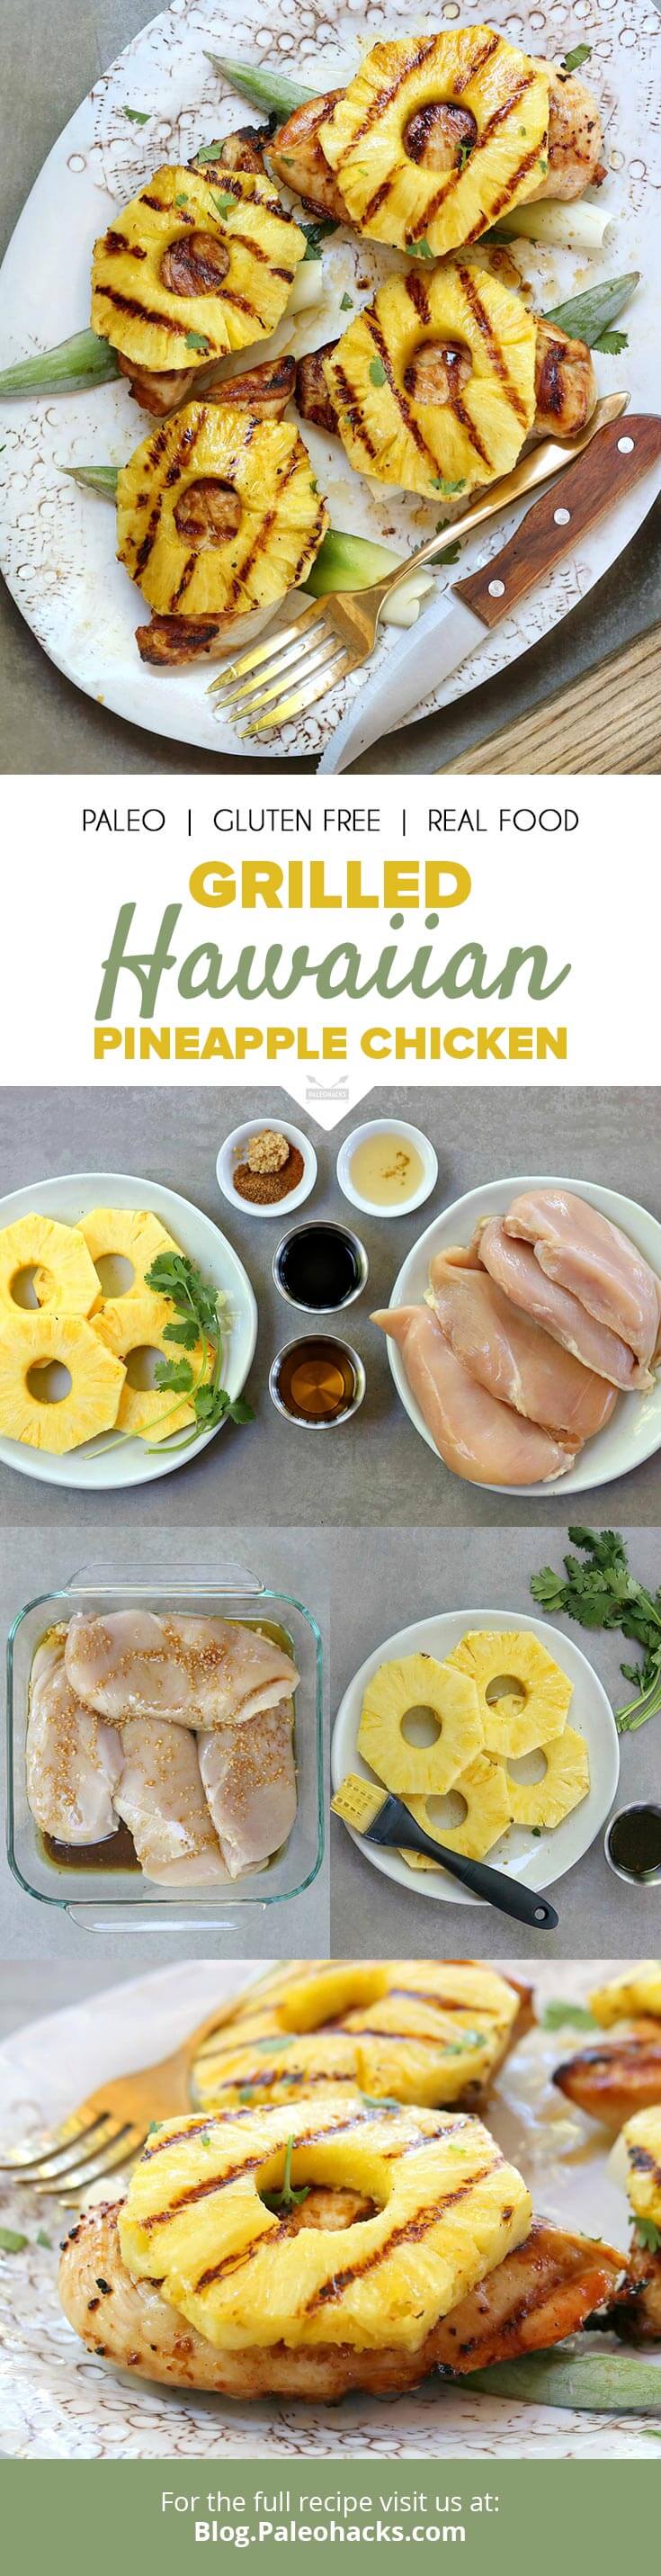 Whisk your senses away with the tropical and sweet flavors of pineapple chicken marinated in a mouthwatering, sticky-sweet glaze.